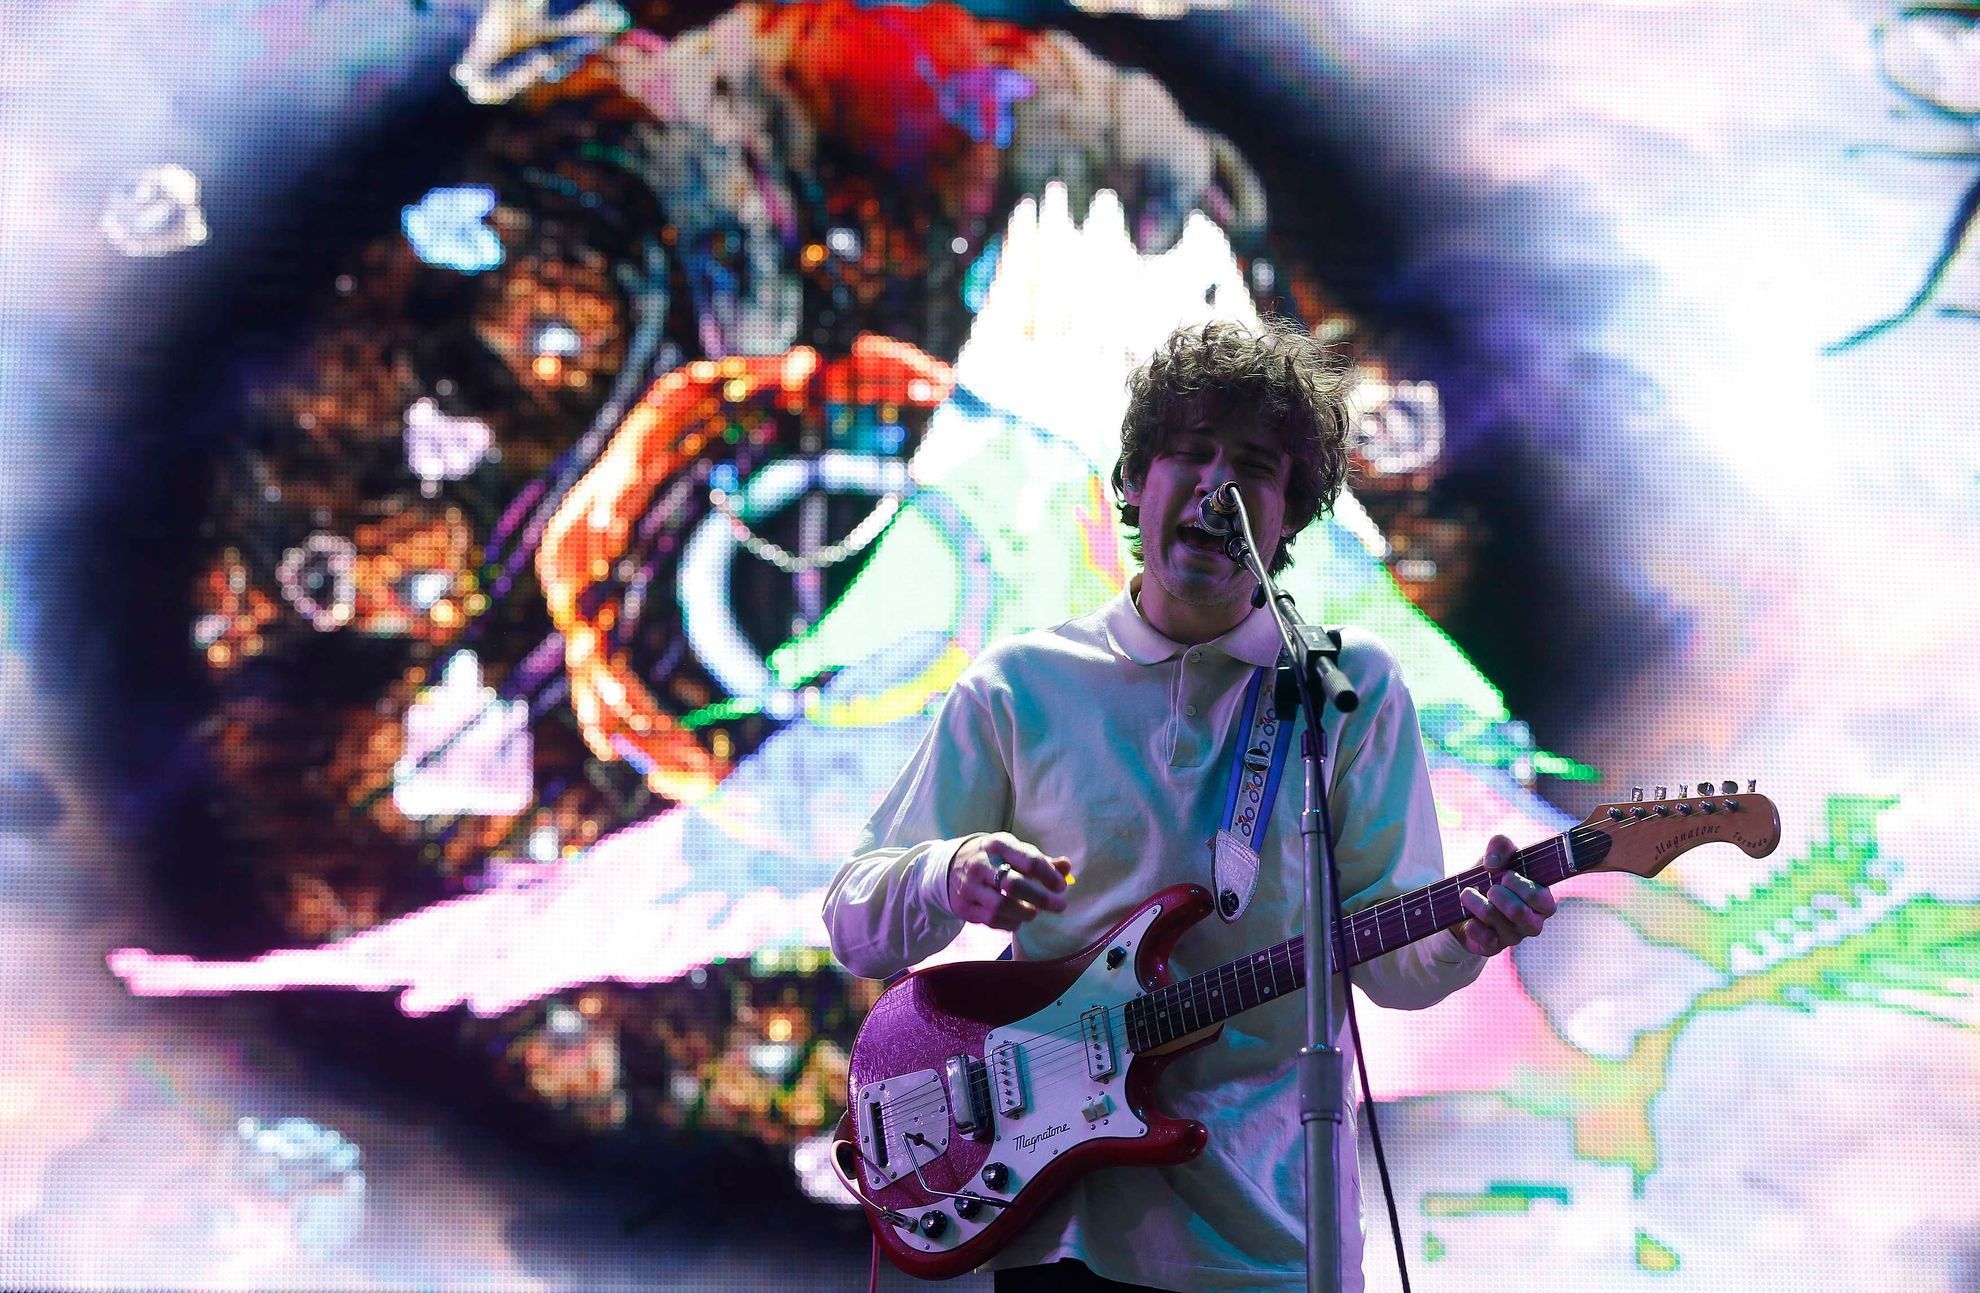 Lead vocalist Andrew VanWyngarden of MGMT performs at the Coachella Valley Music and Arts Festival in Indio